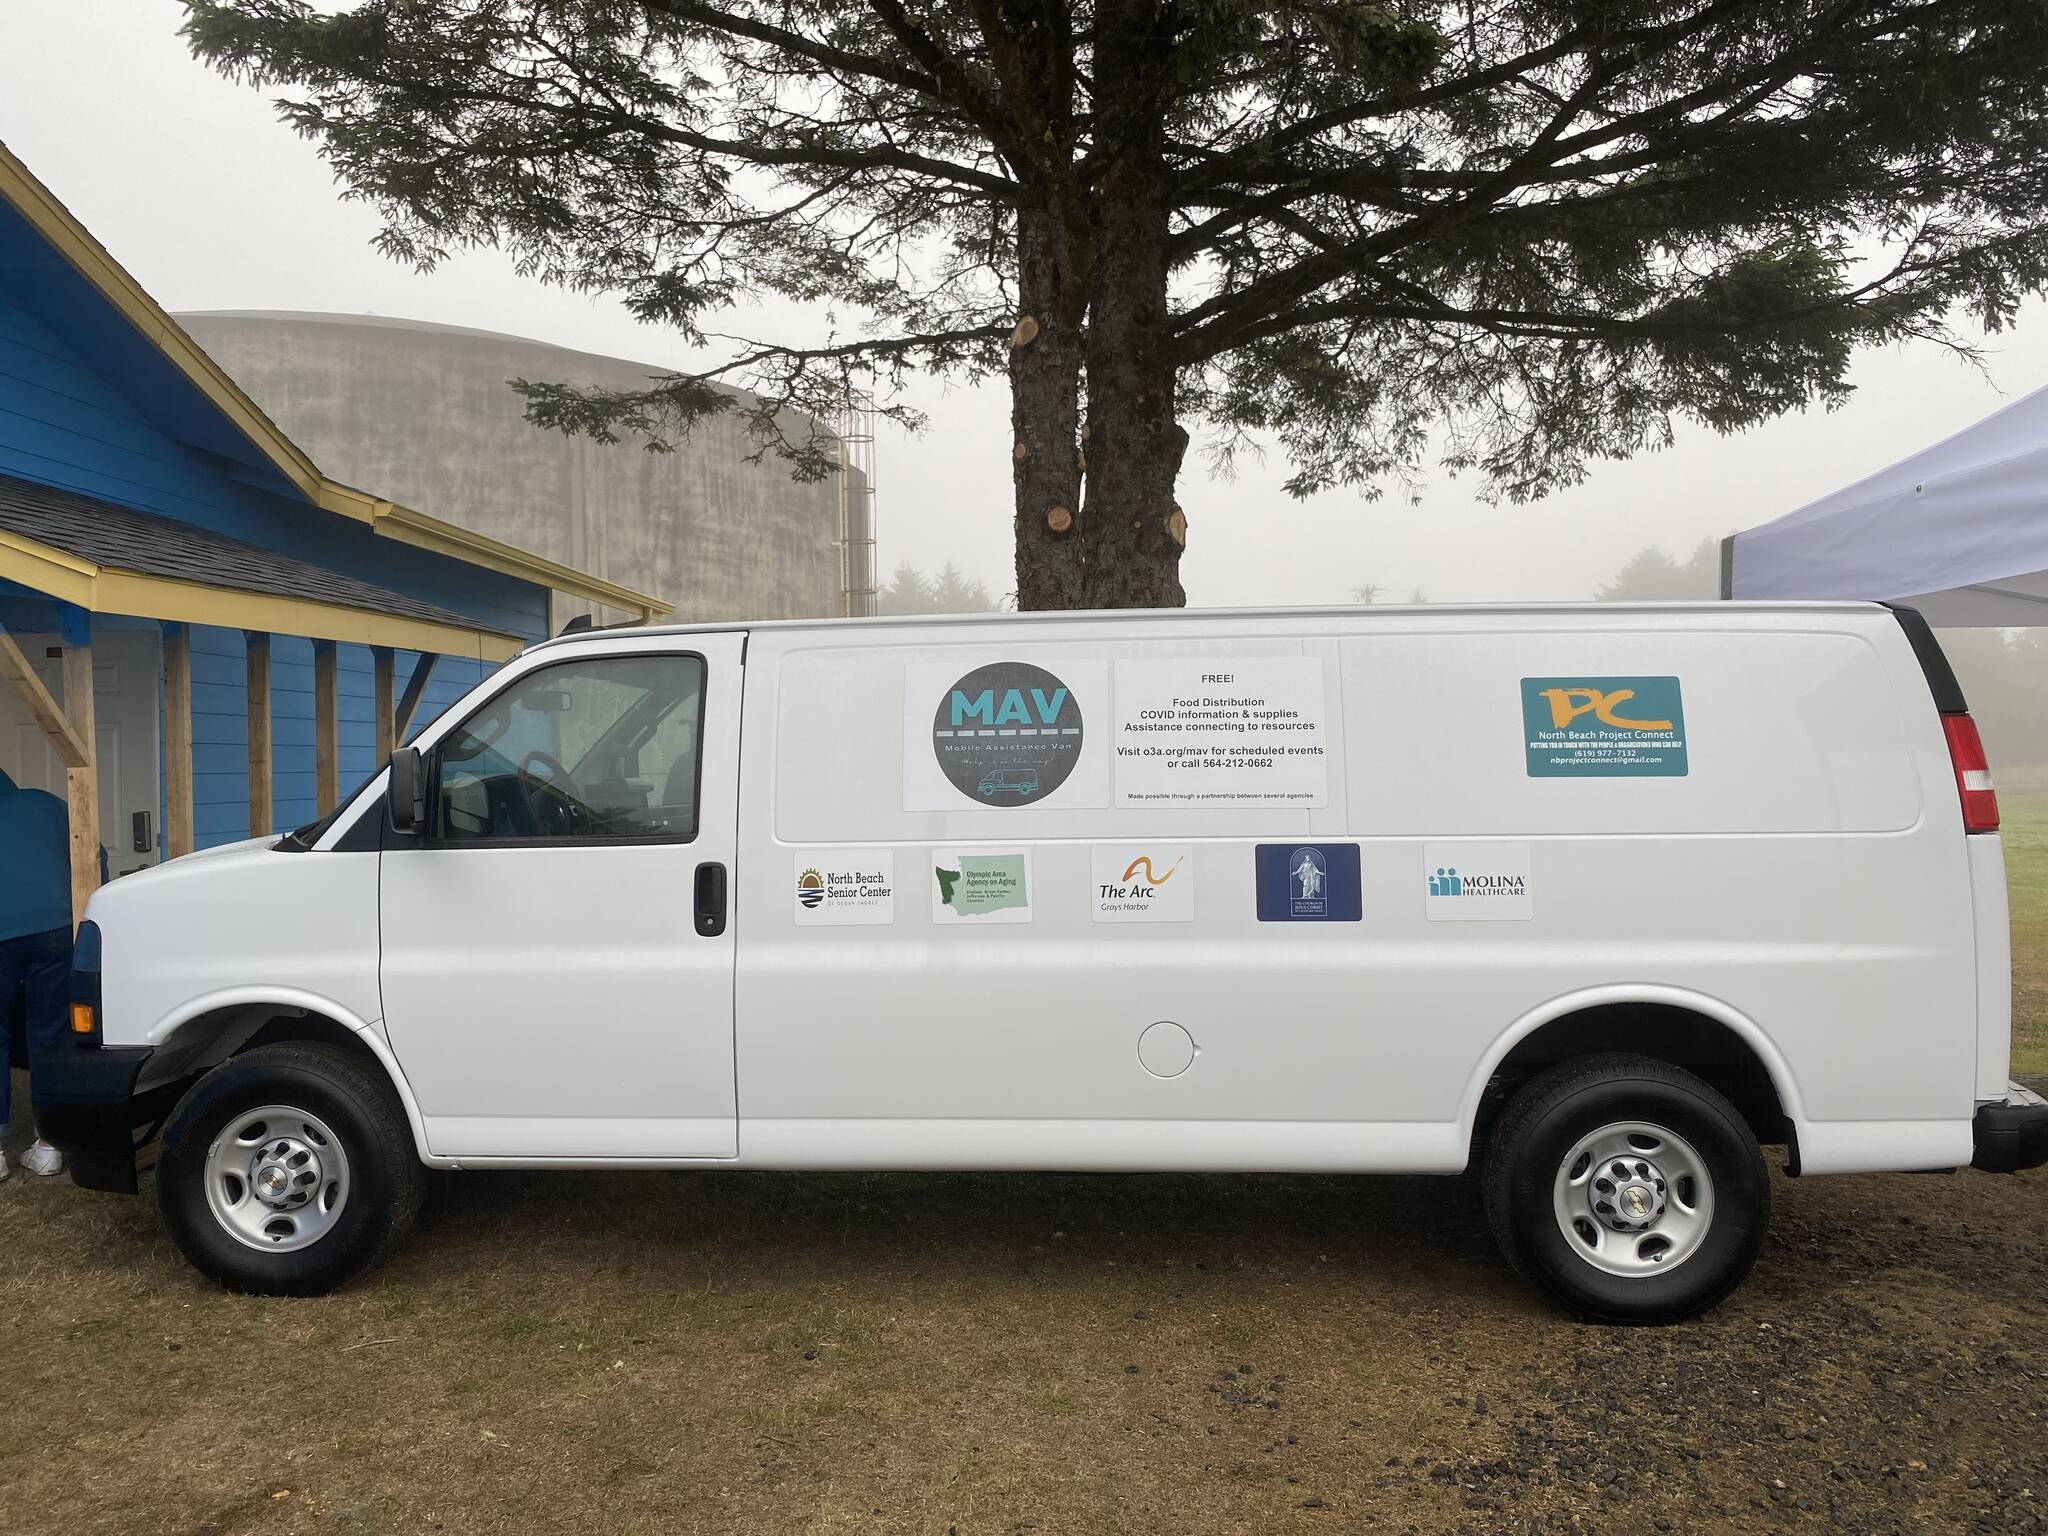 (Photo courtesy of Michelle Fogus) The Mobile Assistance Van (MAV) at its inaugural event in October. The van provides health supplies, food, and access to healthcare services.